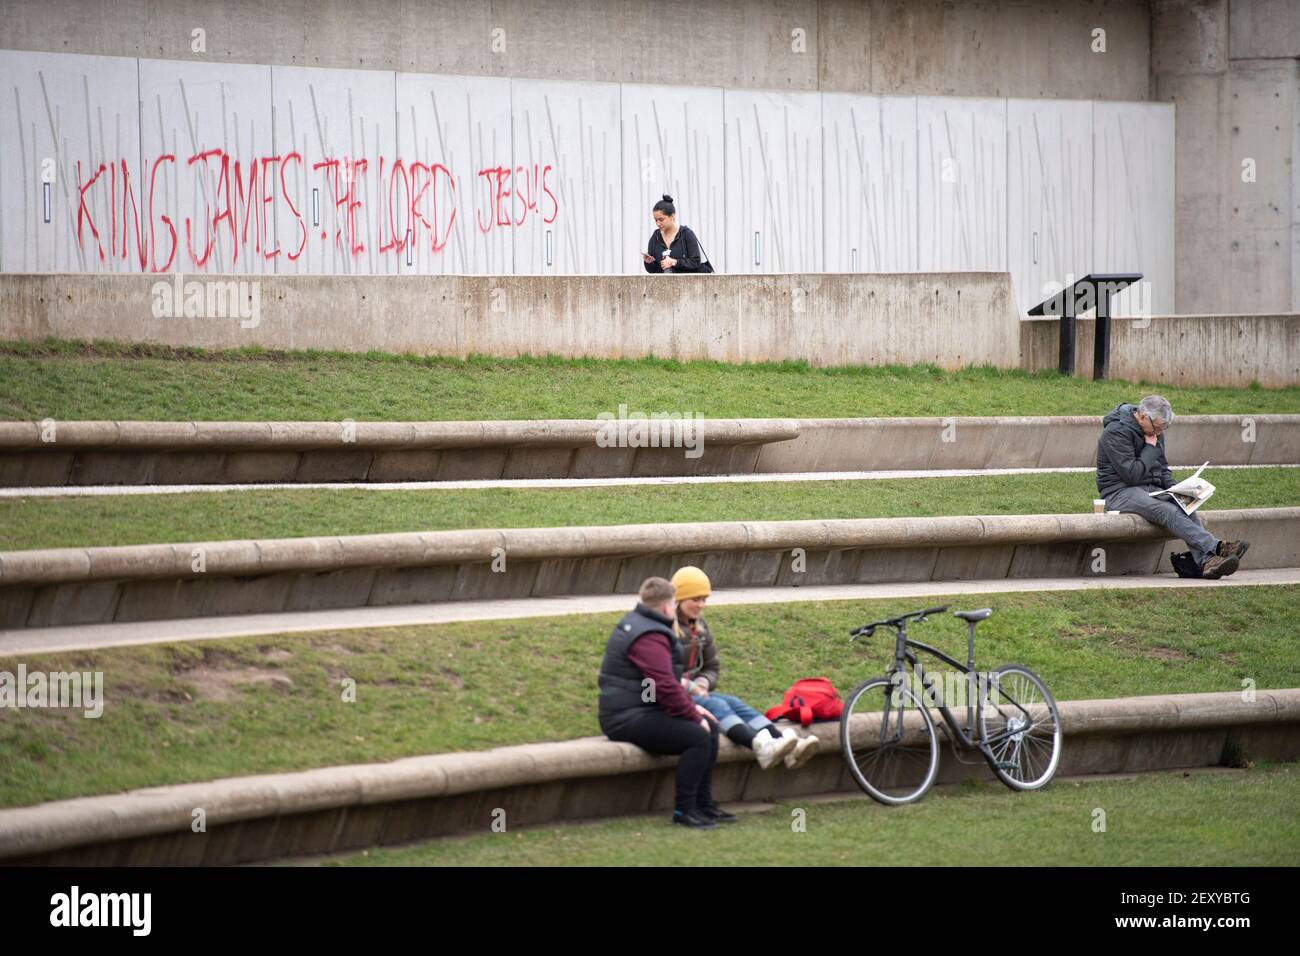 Edinburgh, Scotland, UK. 5th Mar, 2021. Pictured: Red spray paint graffiti covers the front wall of the Scottish Parliament which reads, “KING JAMES THE LORD JESUS” Credit: Colin Fisher/Alamy Live News Stock Photo